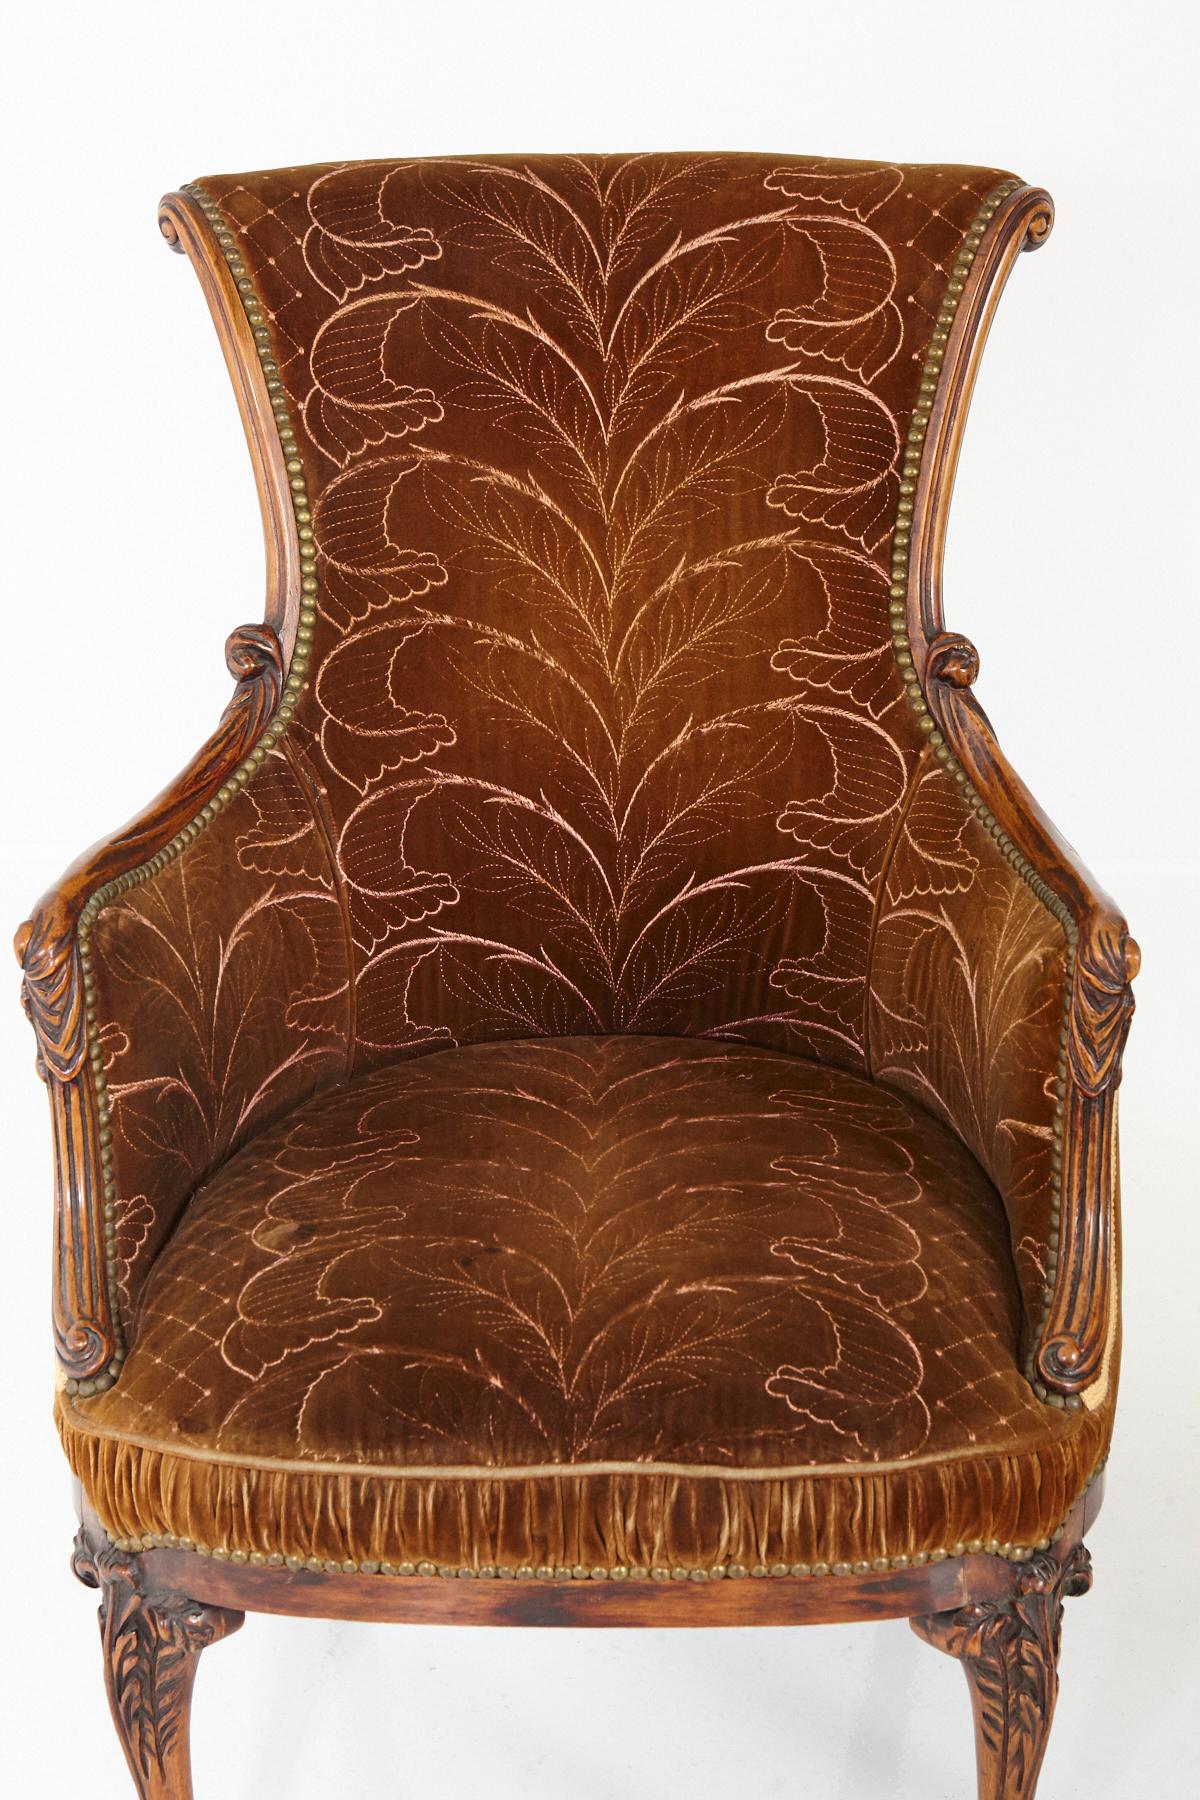 Pair of French Art Nouveau Armchairs, Two-Tone Cognac Colored Embroidered Velvet 2